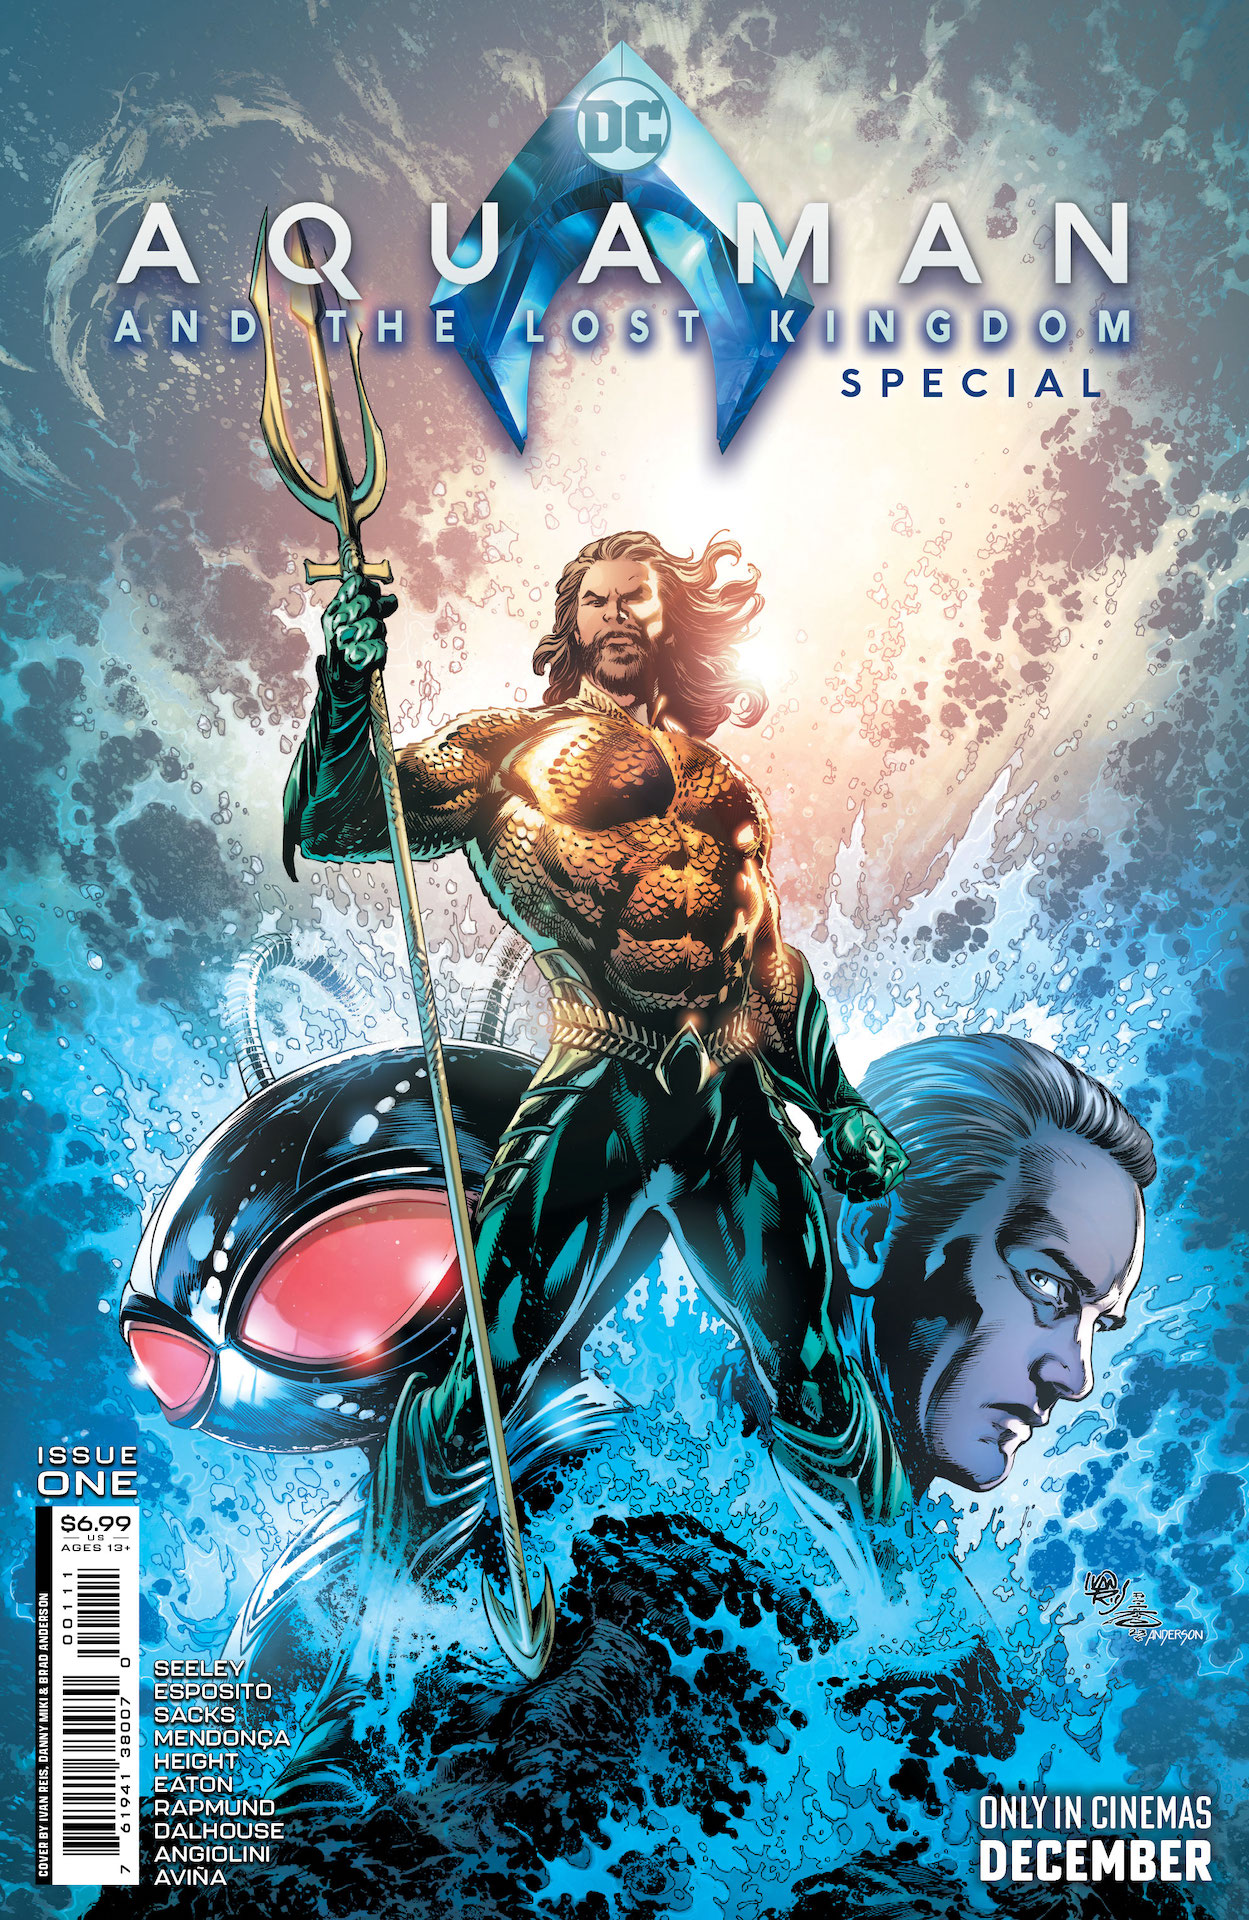 DC Preview: Aquaman and the Lost Kingdom Special #1